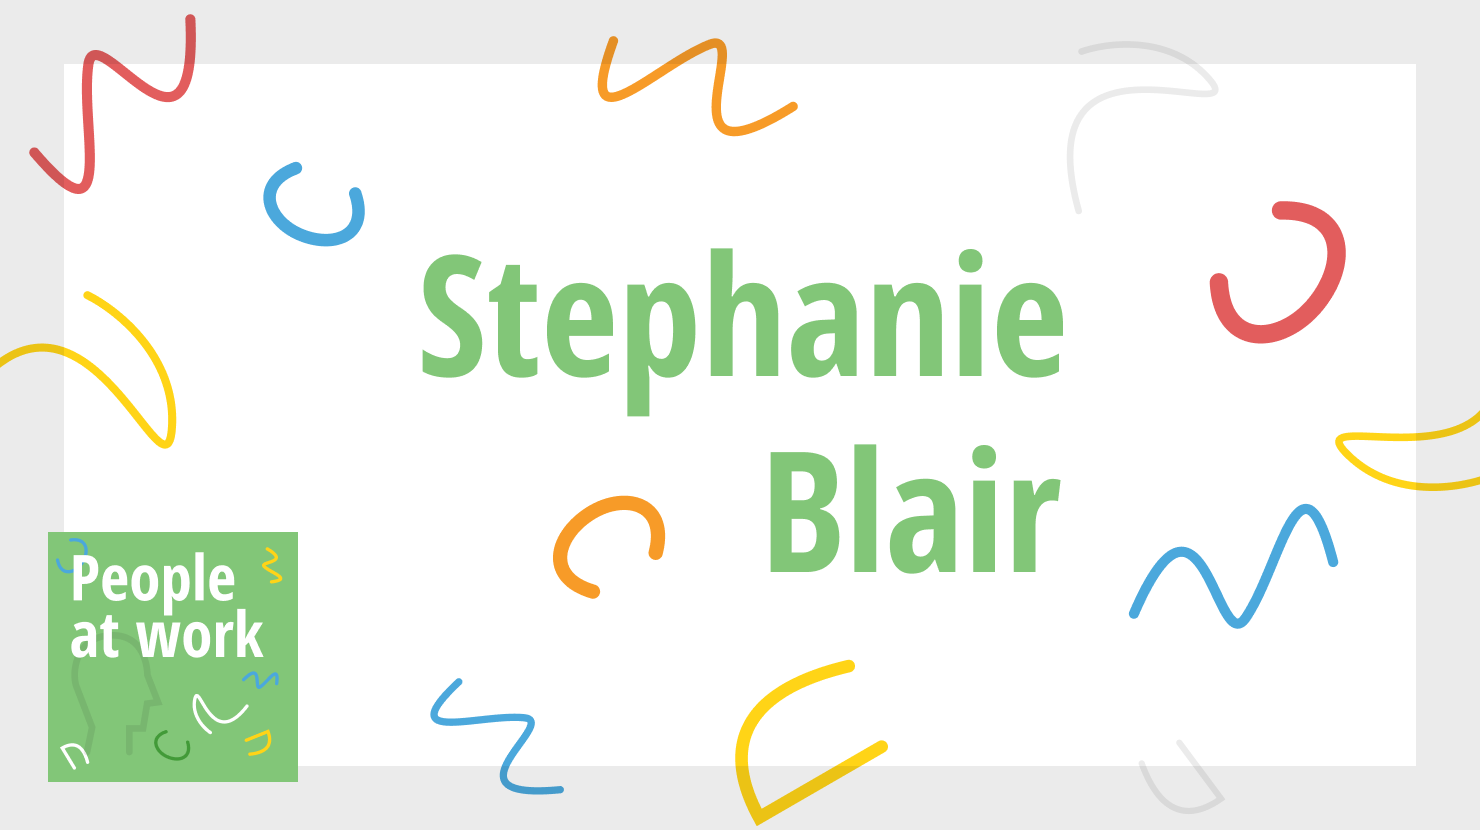 Now is the time to really figure out your “why” with Stephanie Blair